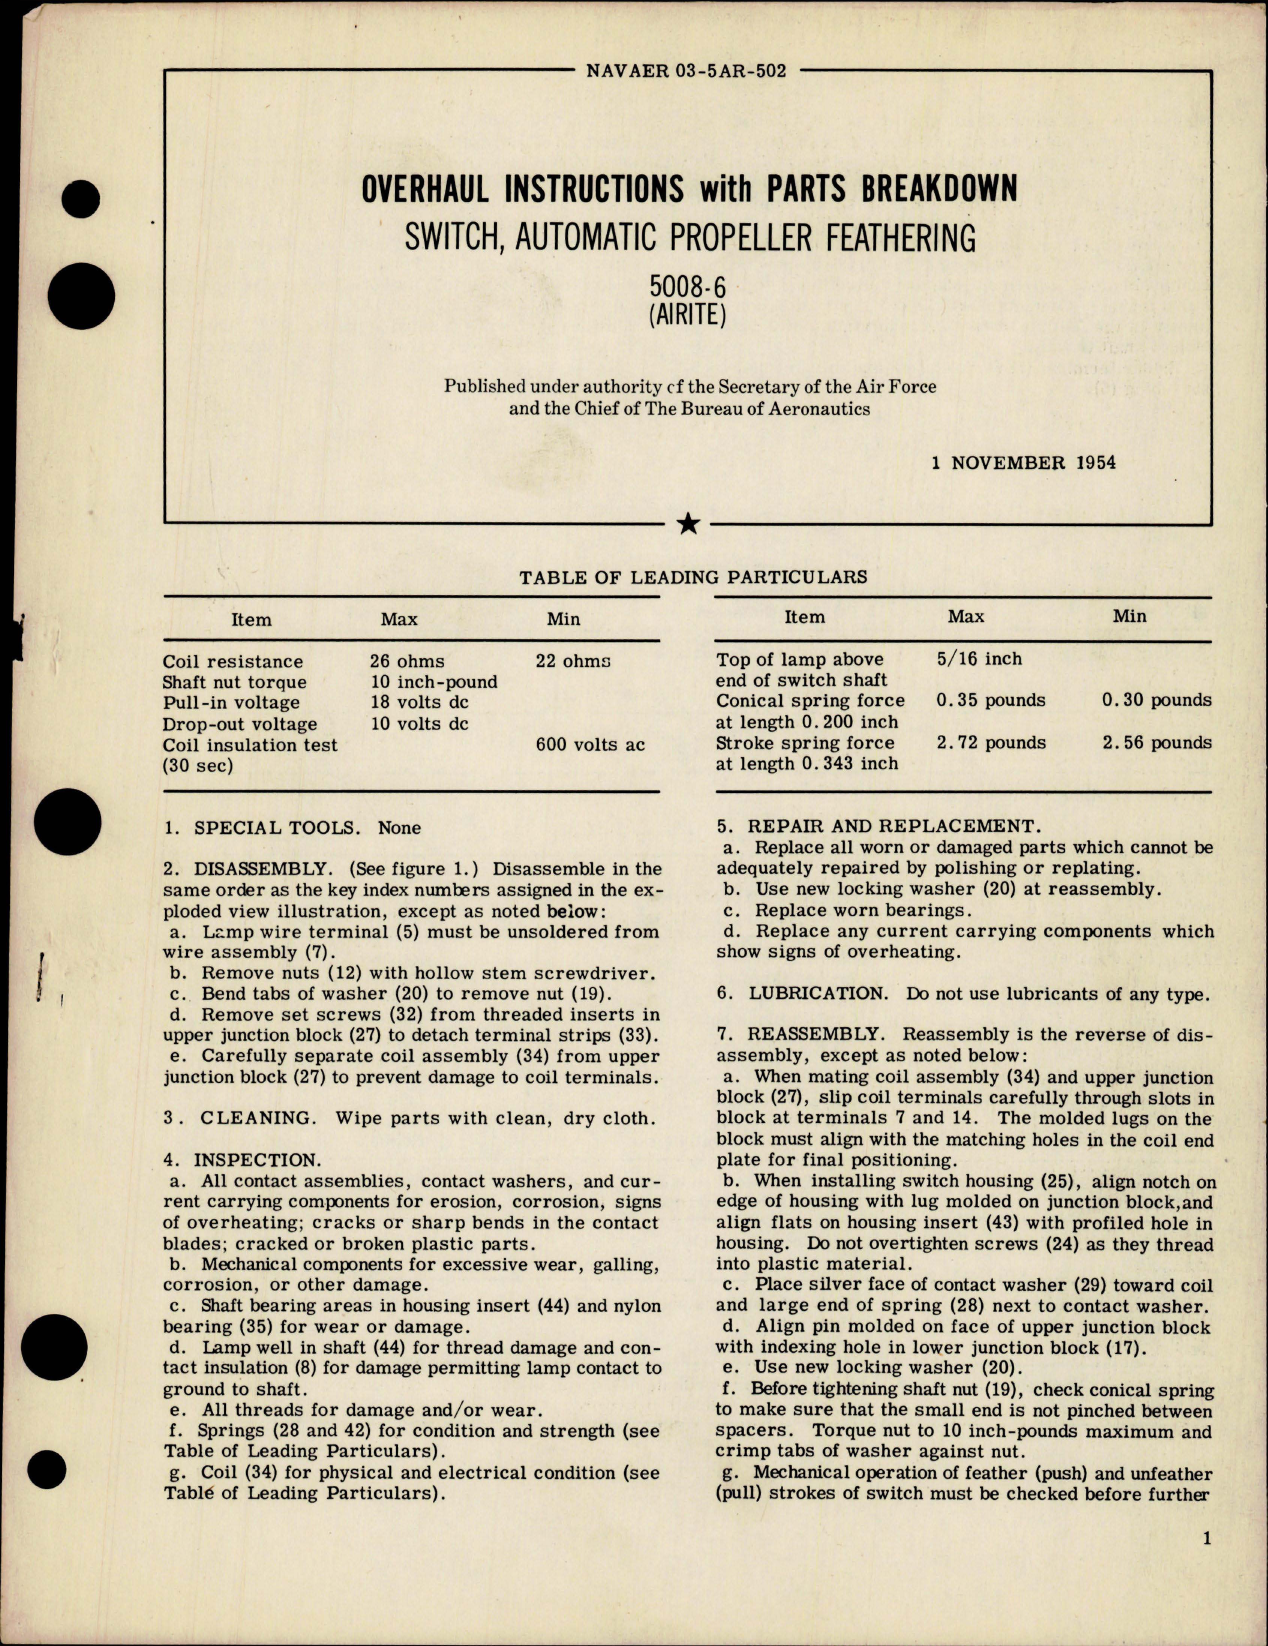 Sample page 1 from AirCorps Library document: Overhaul Instructions with Parts Breakdown for Automatic Propeller Feathering Switch - 5008-6 